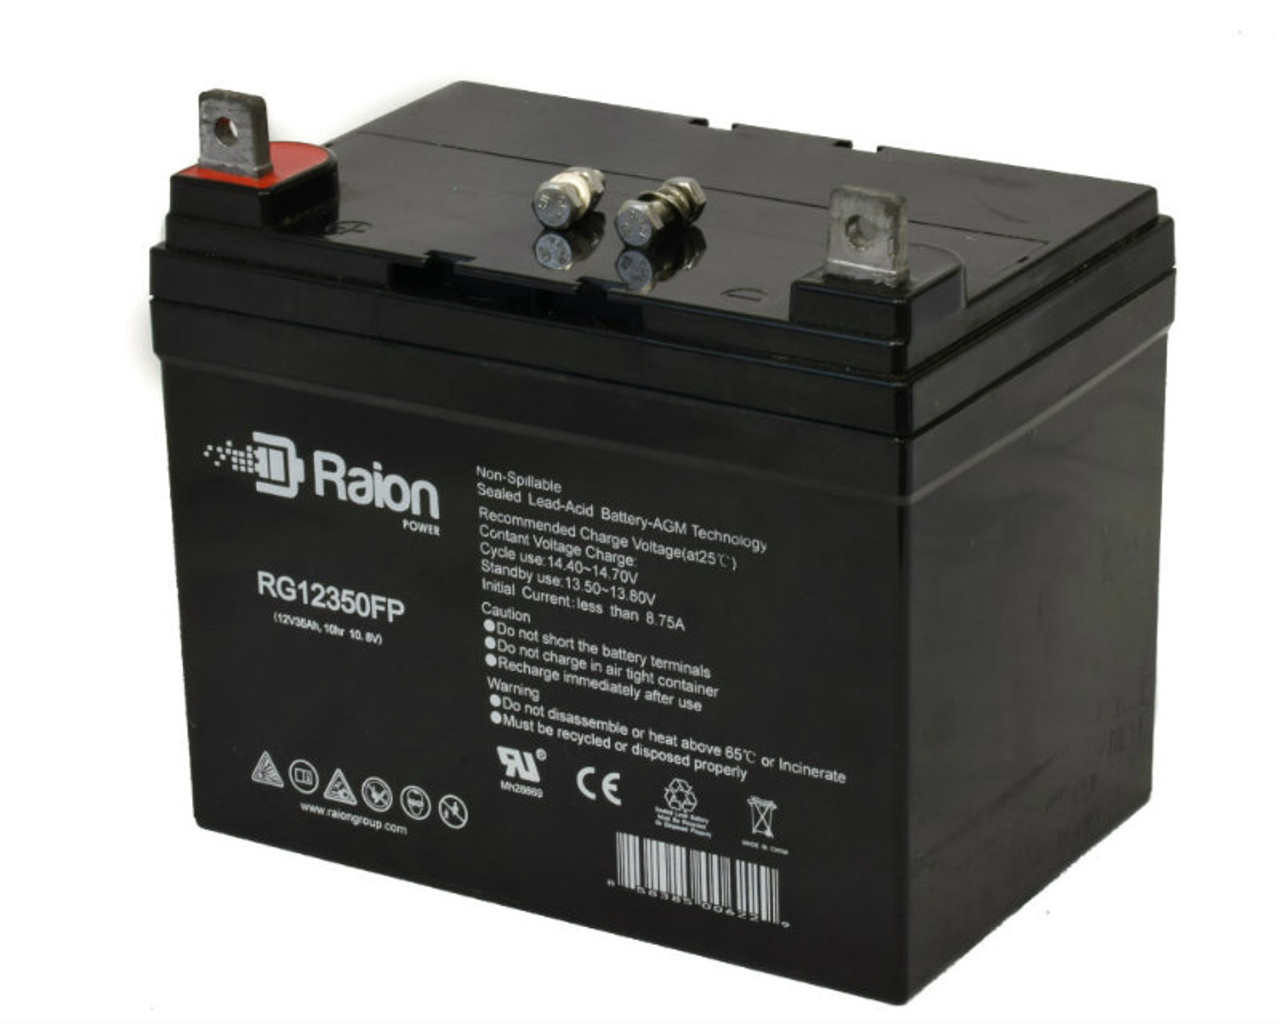 Raion Power Replacement 12V 35Ah RG12350FP Battery for Case International 648